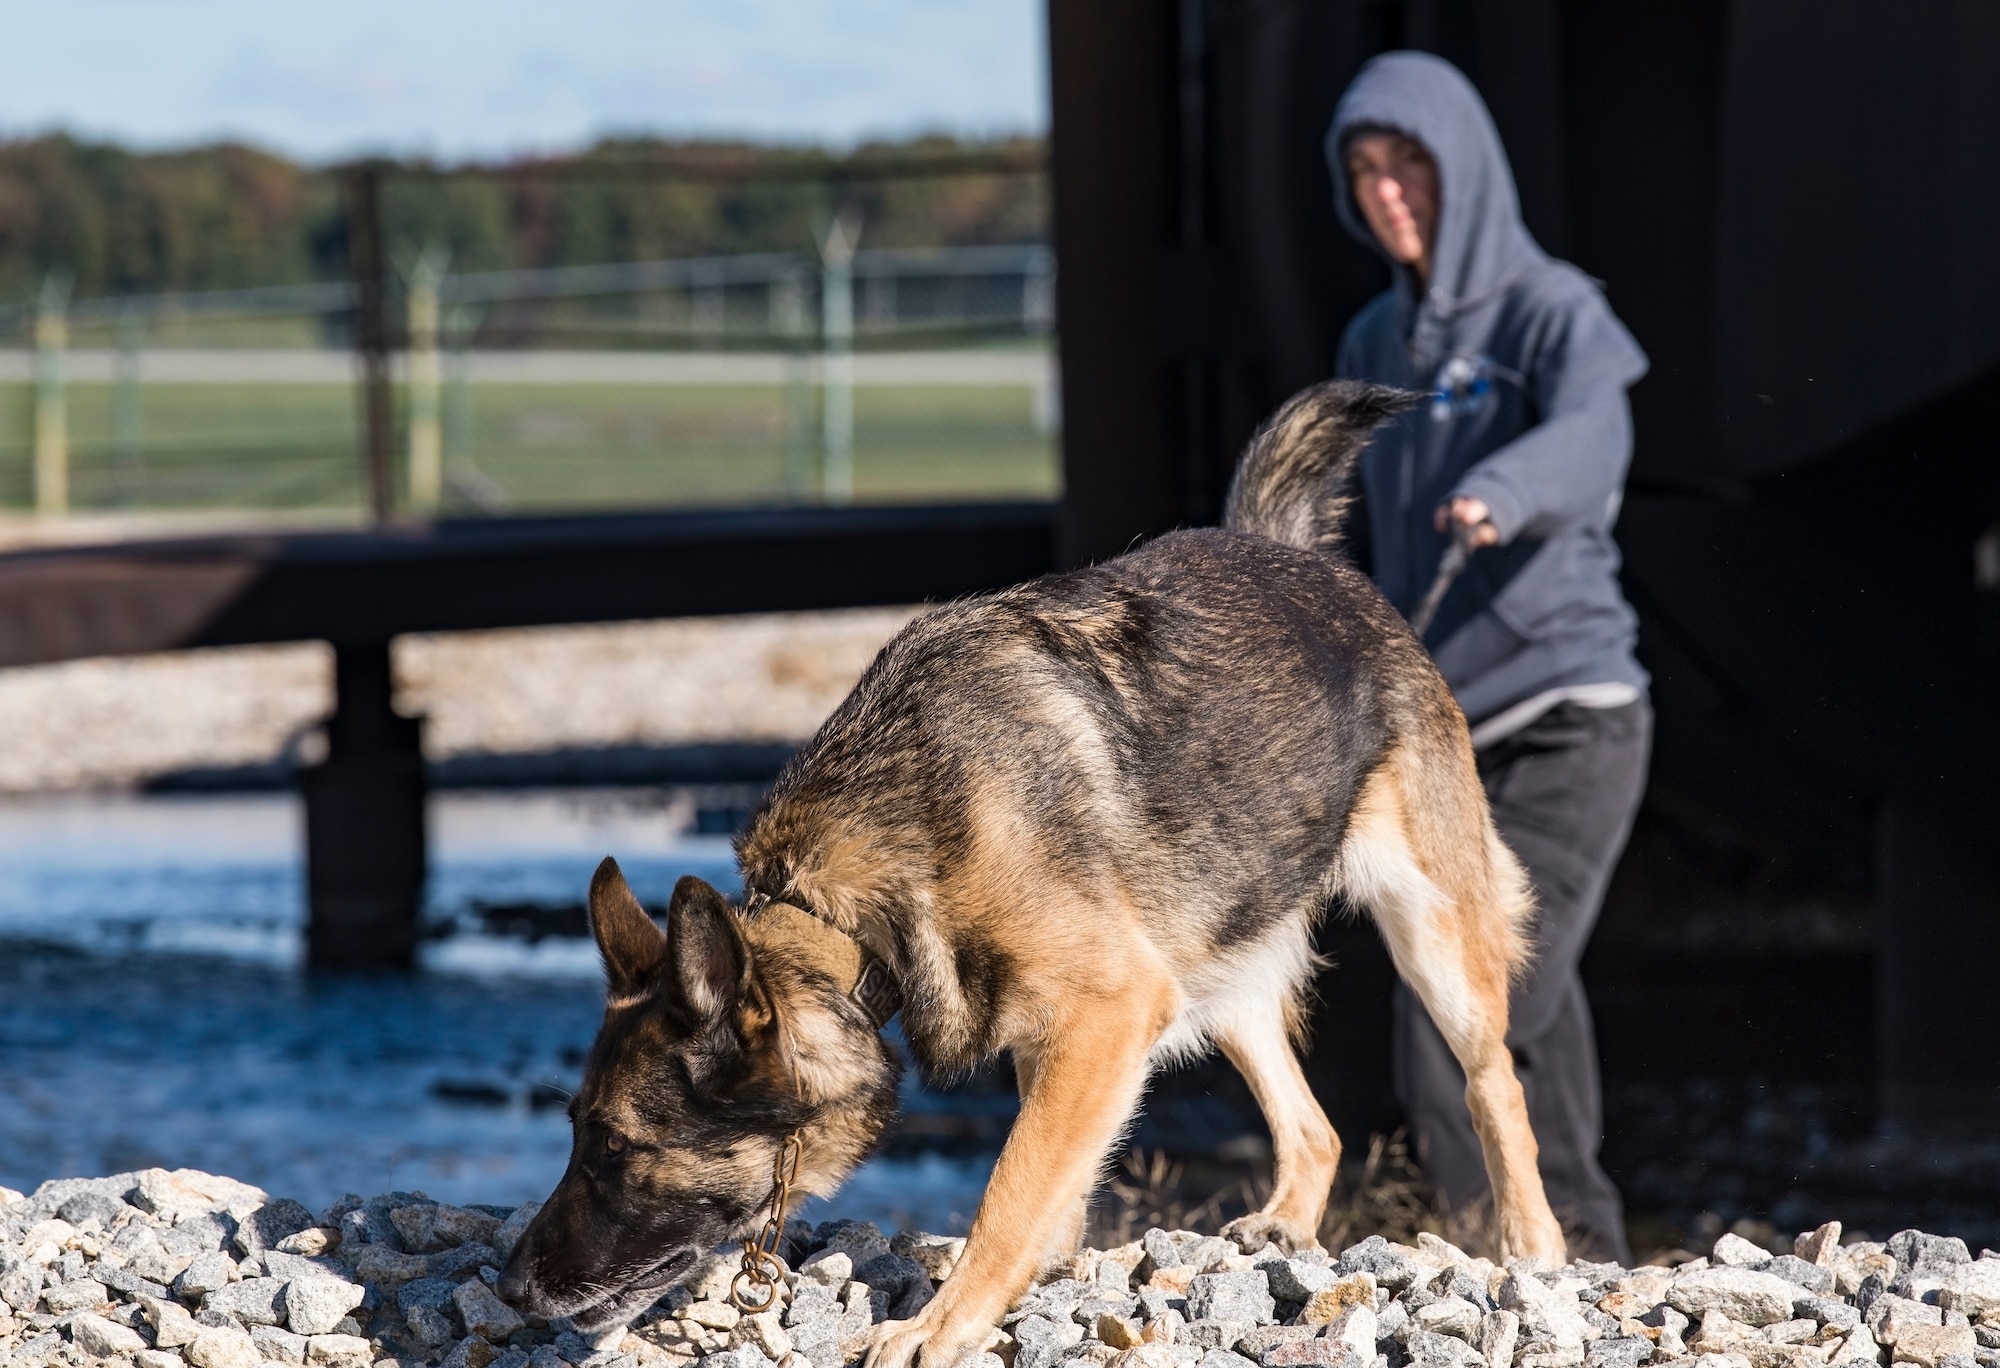 Sgt. Katie Edgar, Worcester County, Md., Sheriff’s Department K-9 Unit supervisor, along with her partner, “Brina,” a three-year-old German Shepherd narcotics detection dog, search for hidden narcotics Oct. 24, 2018, at Dover Air Force Base, Del. Several members from the Worcester County Sheriff's Department and two working dogs participated in the joint training session hosted by the 436th Security Forces Squadron from Dover AFB. (U.S. Air Force photo by Roland Balik)